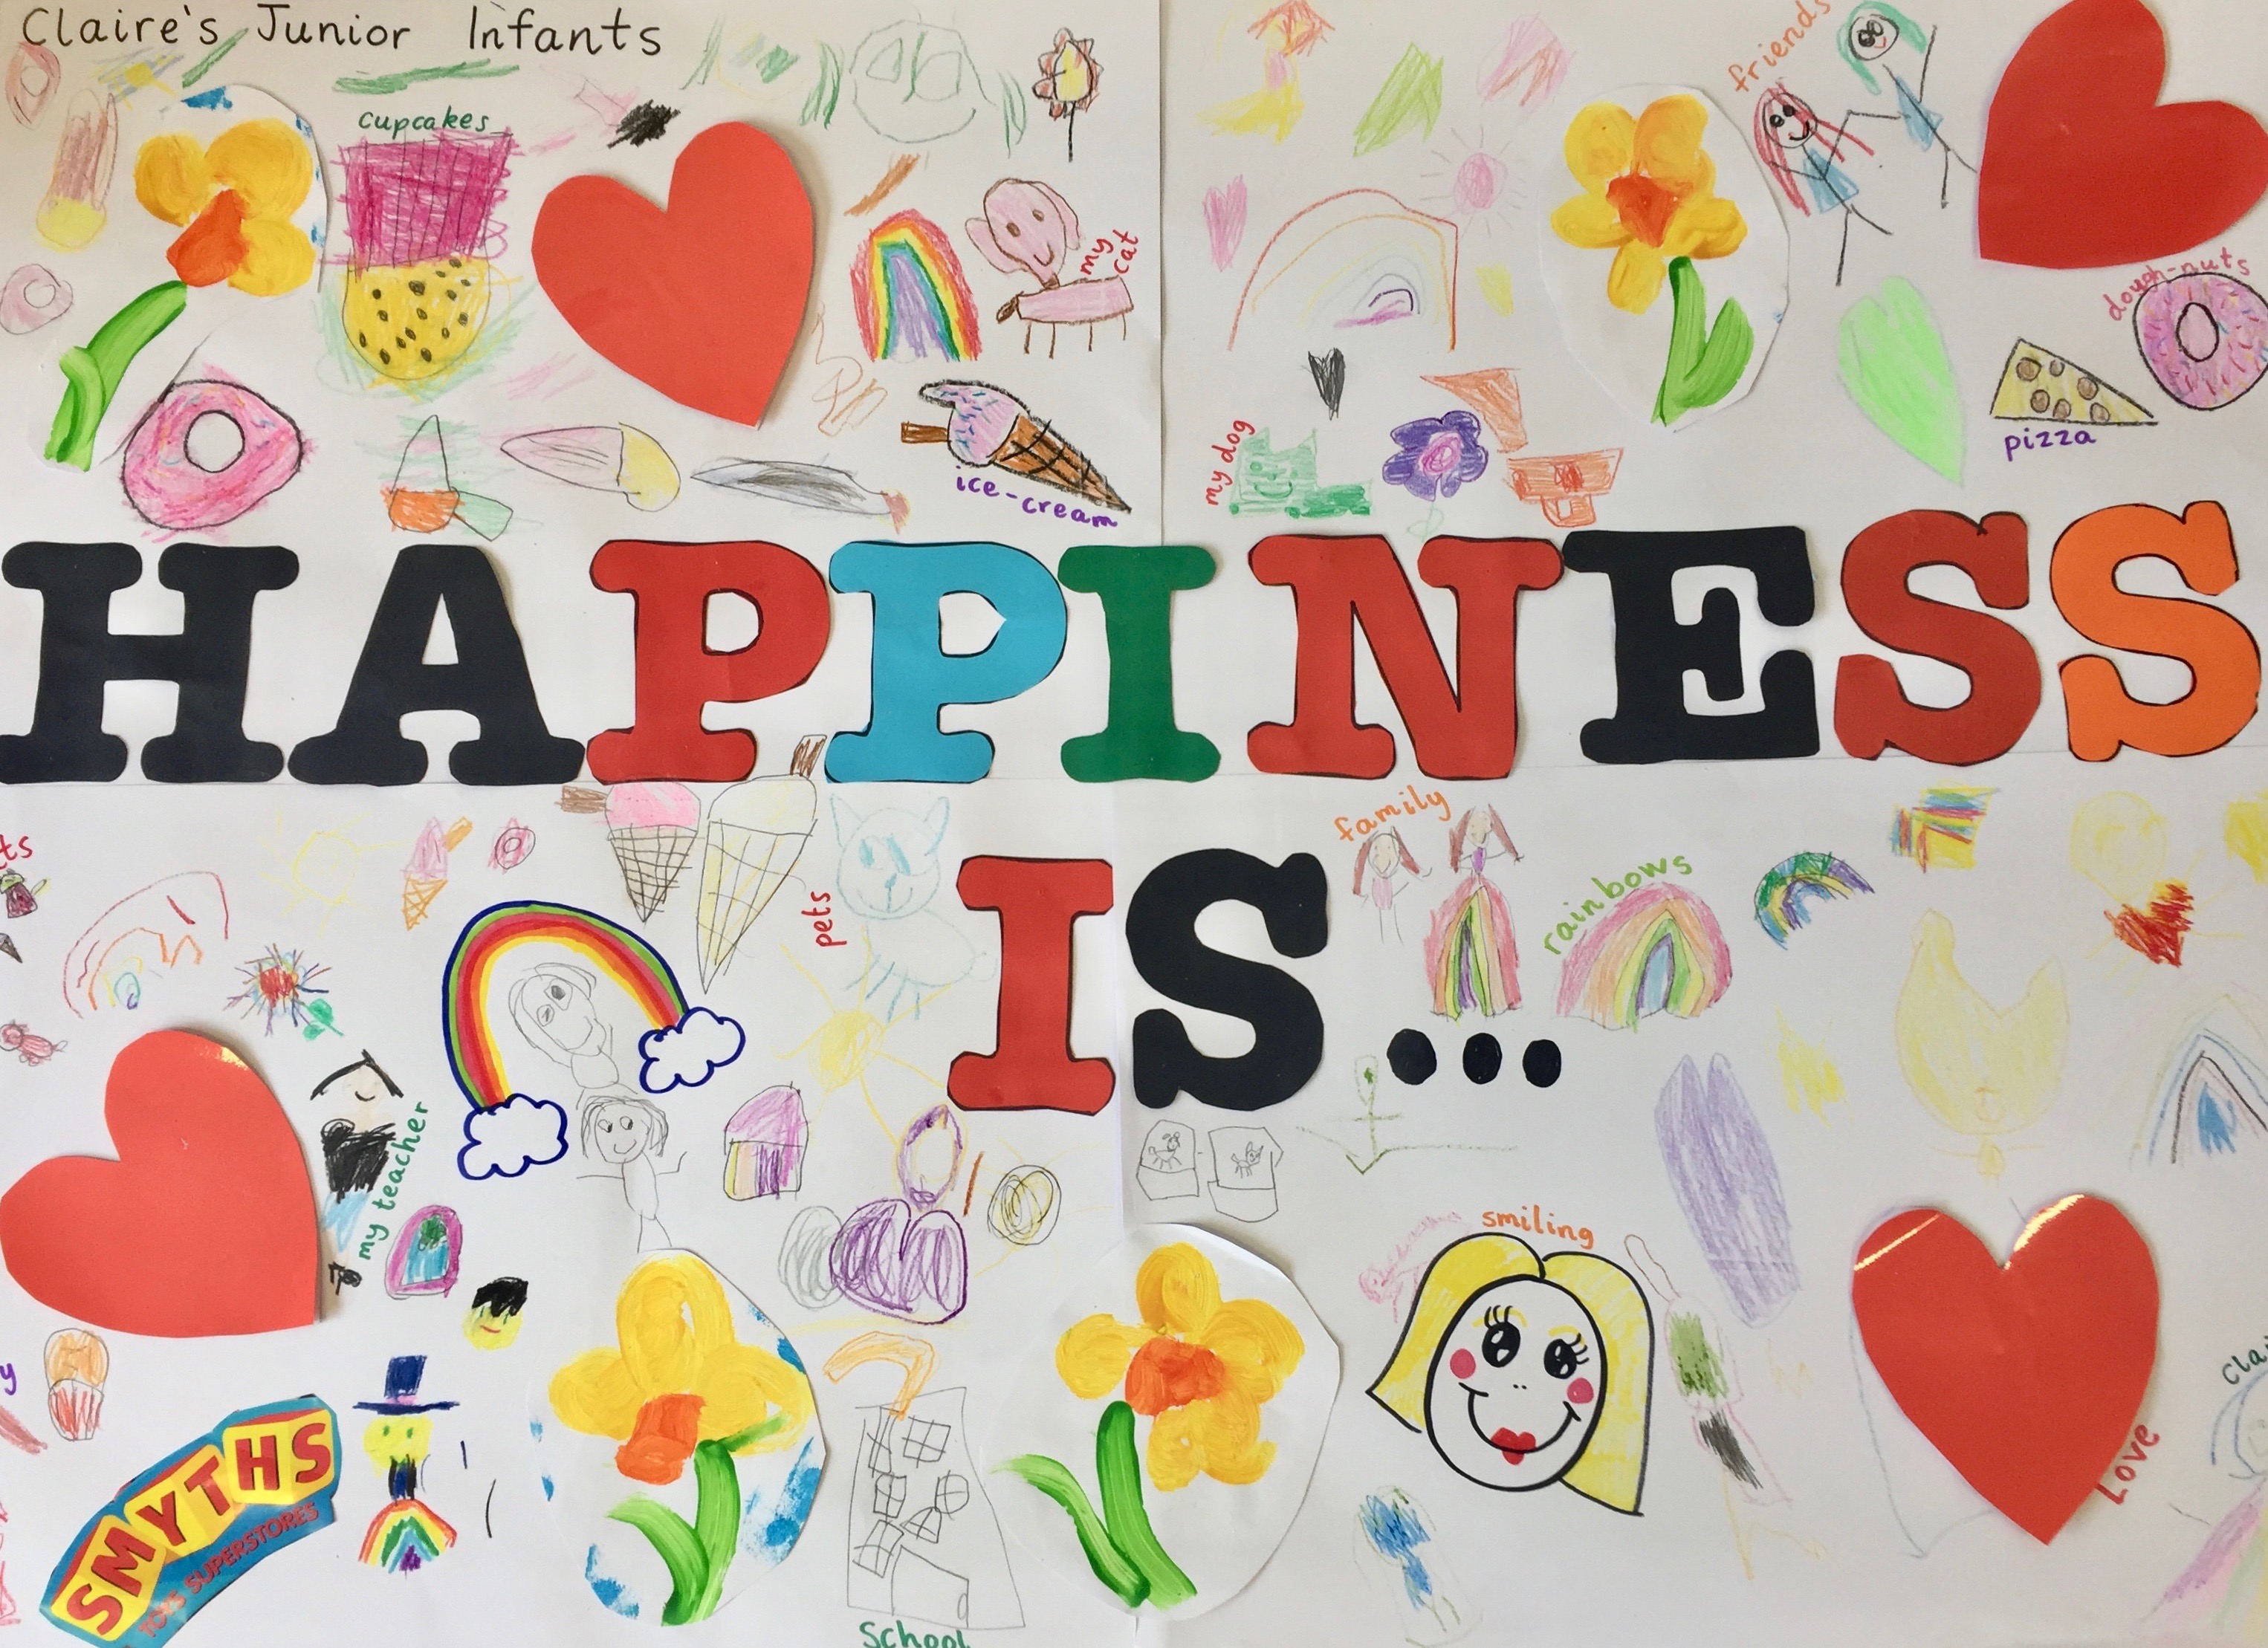 'Happiness is...' by Claire's Junior Infants () from Louth